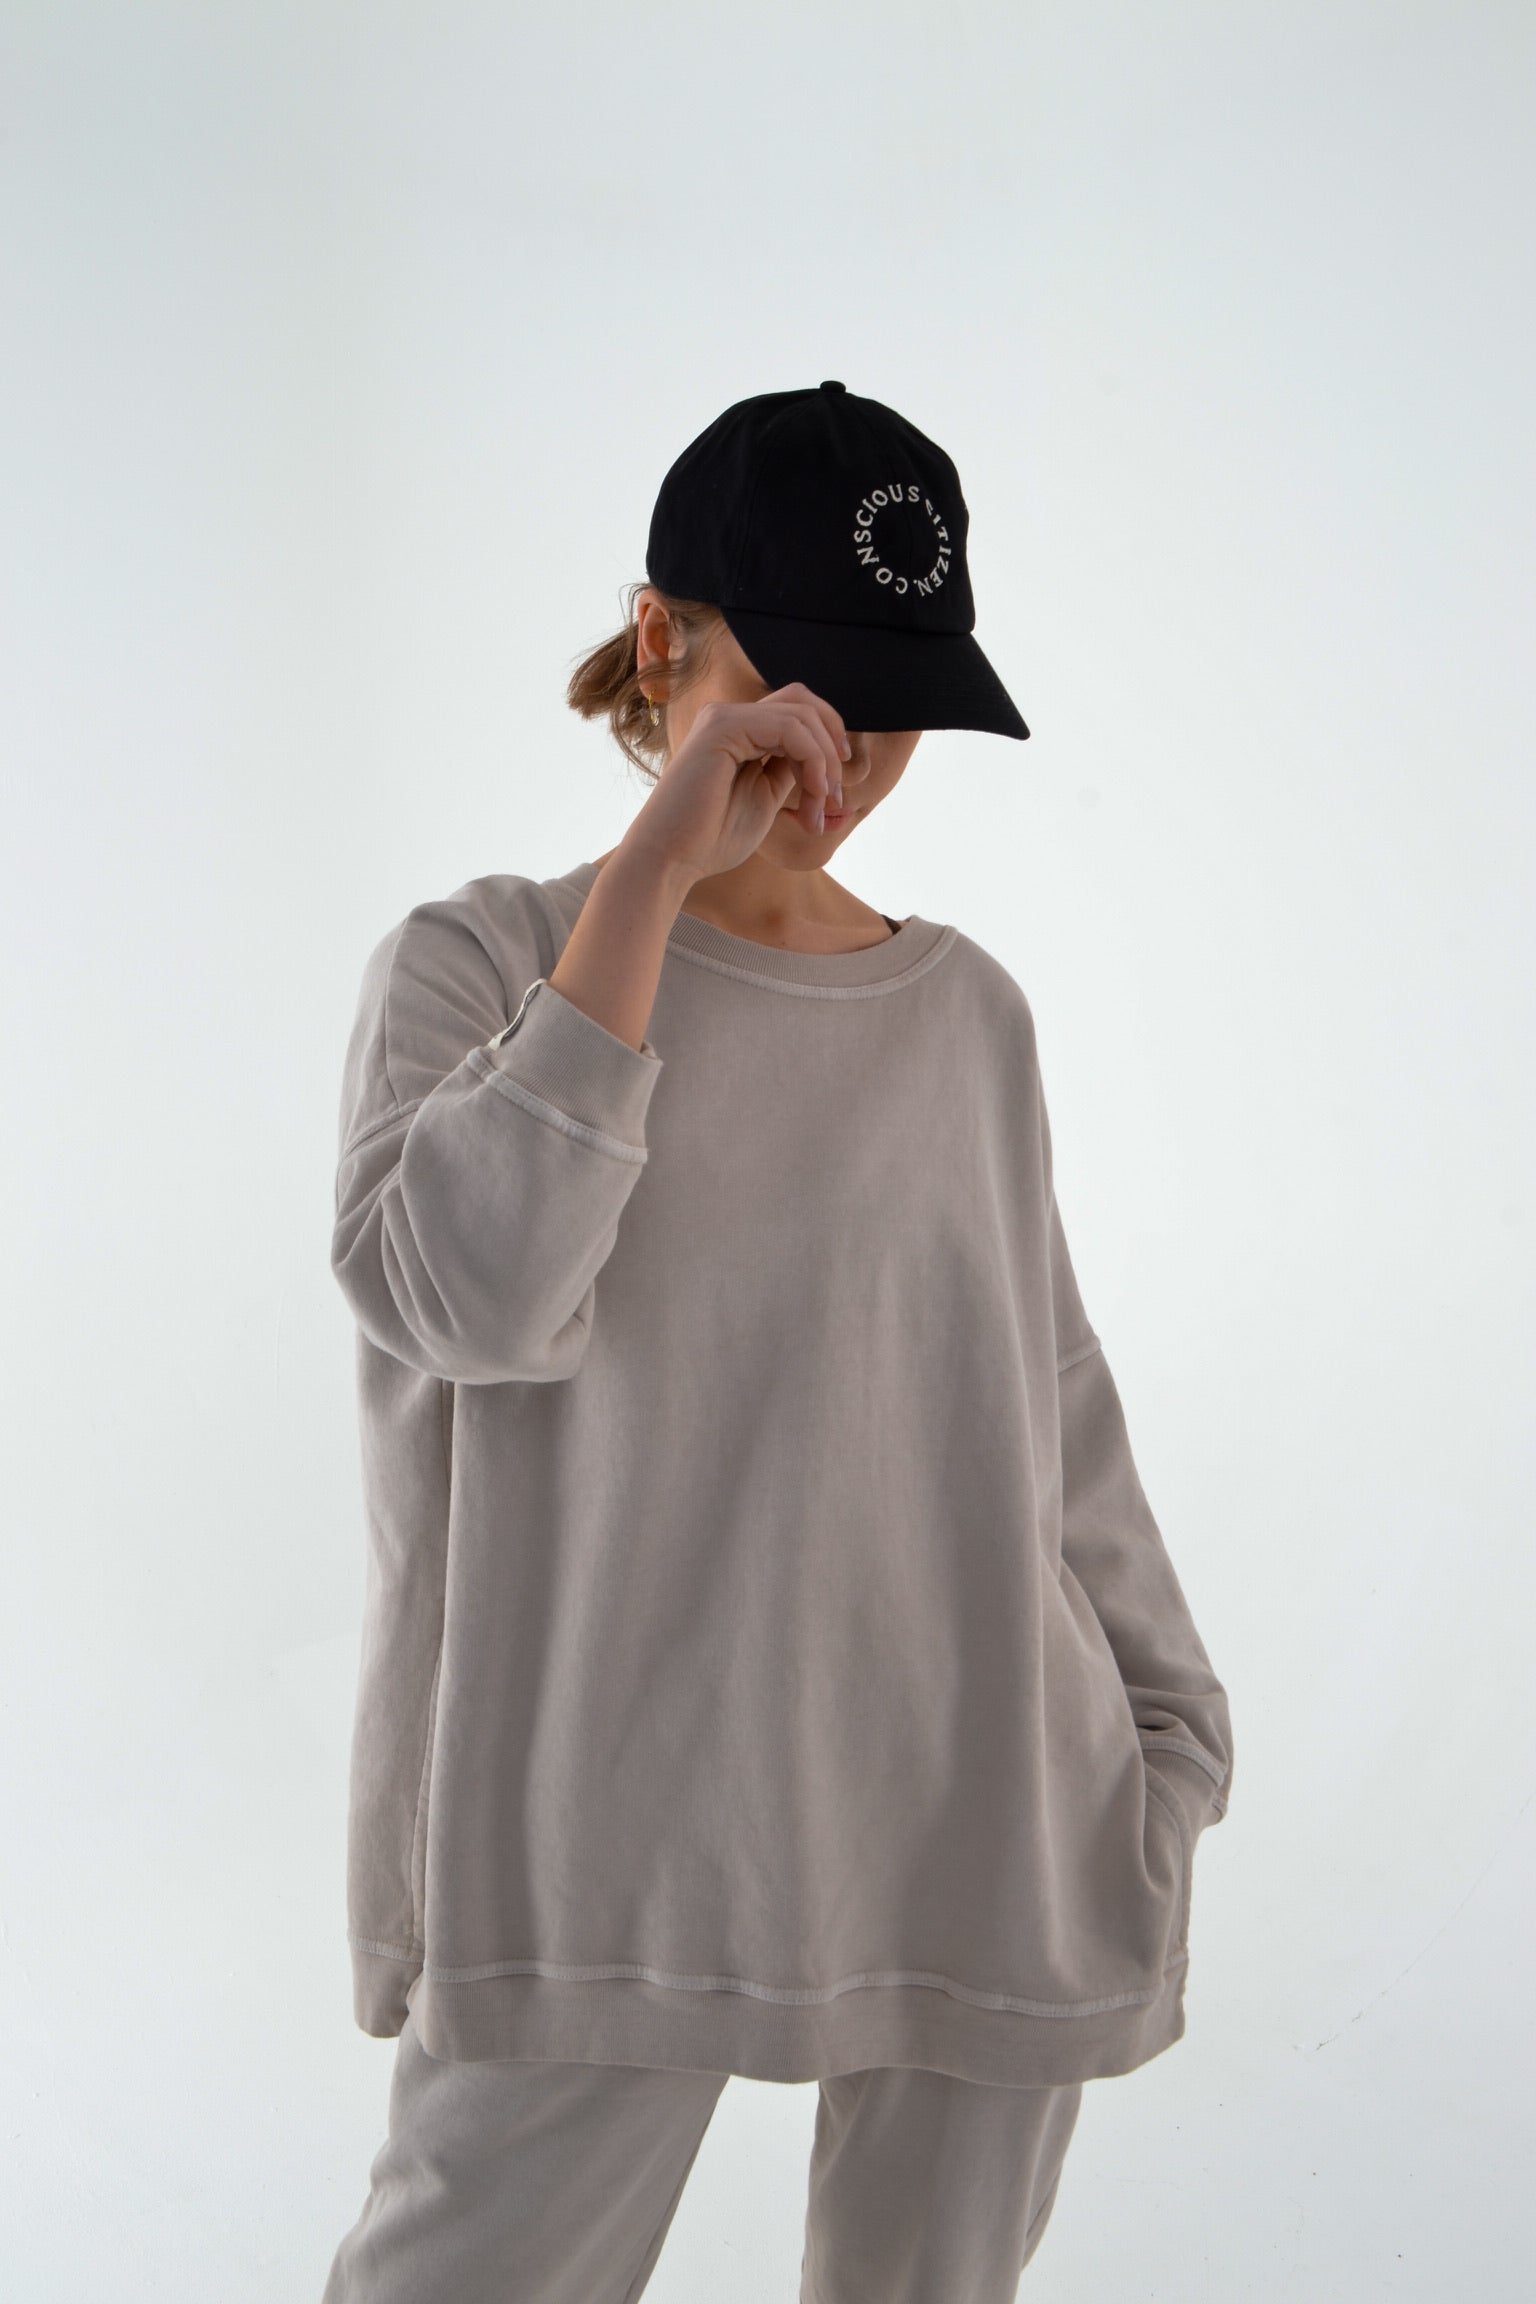  Indulge in the comfort of a soft organic cotton cap, crafted with care for the planet